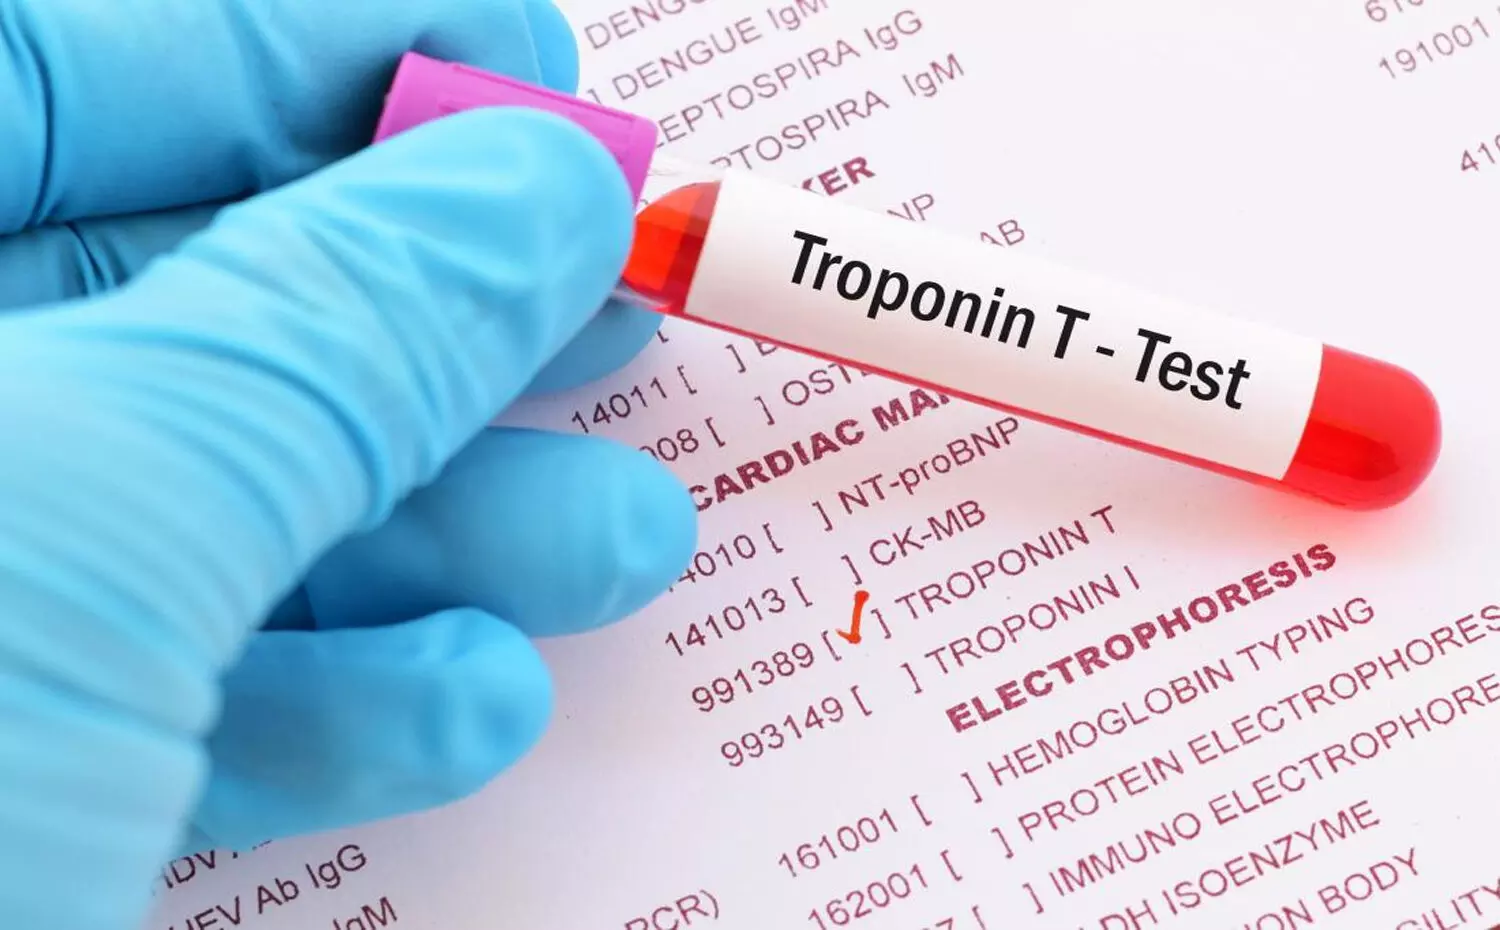 Single high-sensitivity cardiac troponin T reading can safely exclude MI in ED